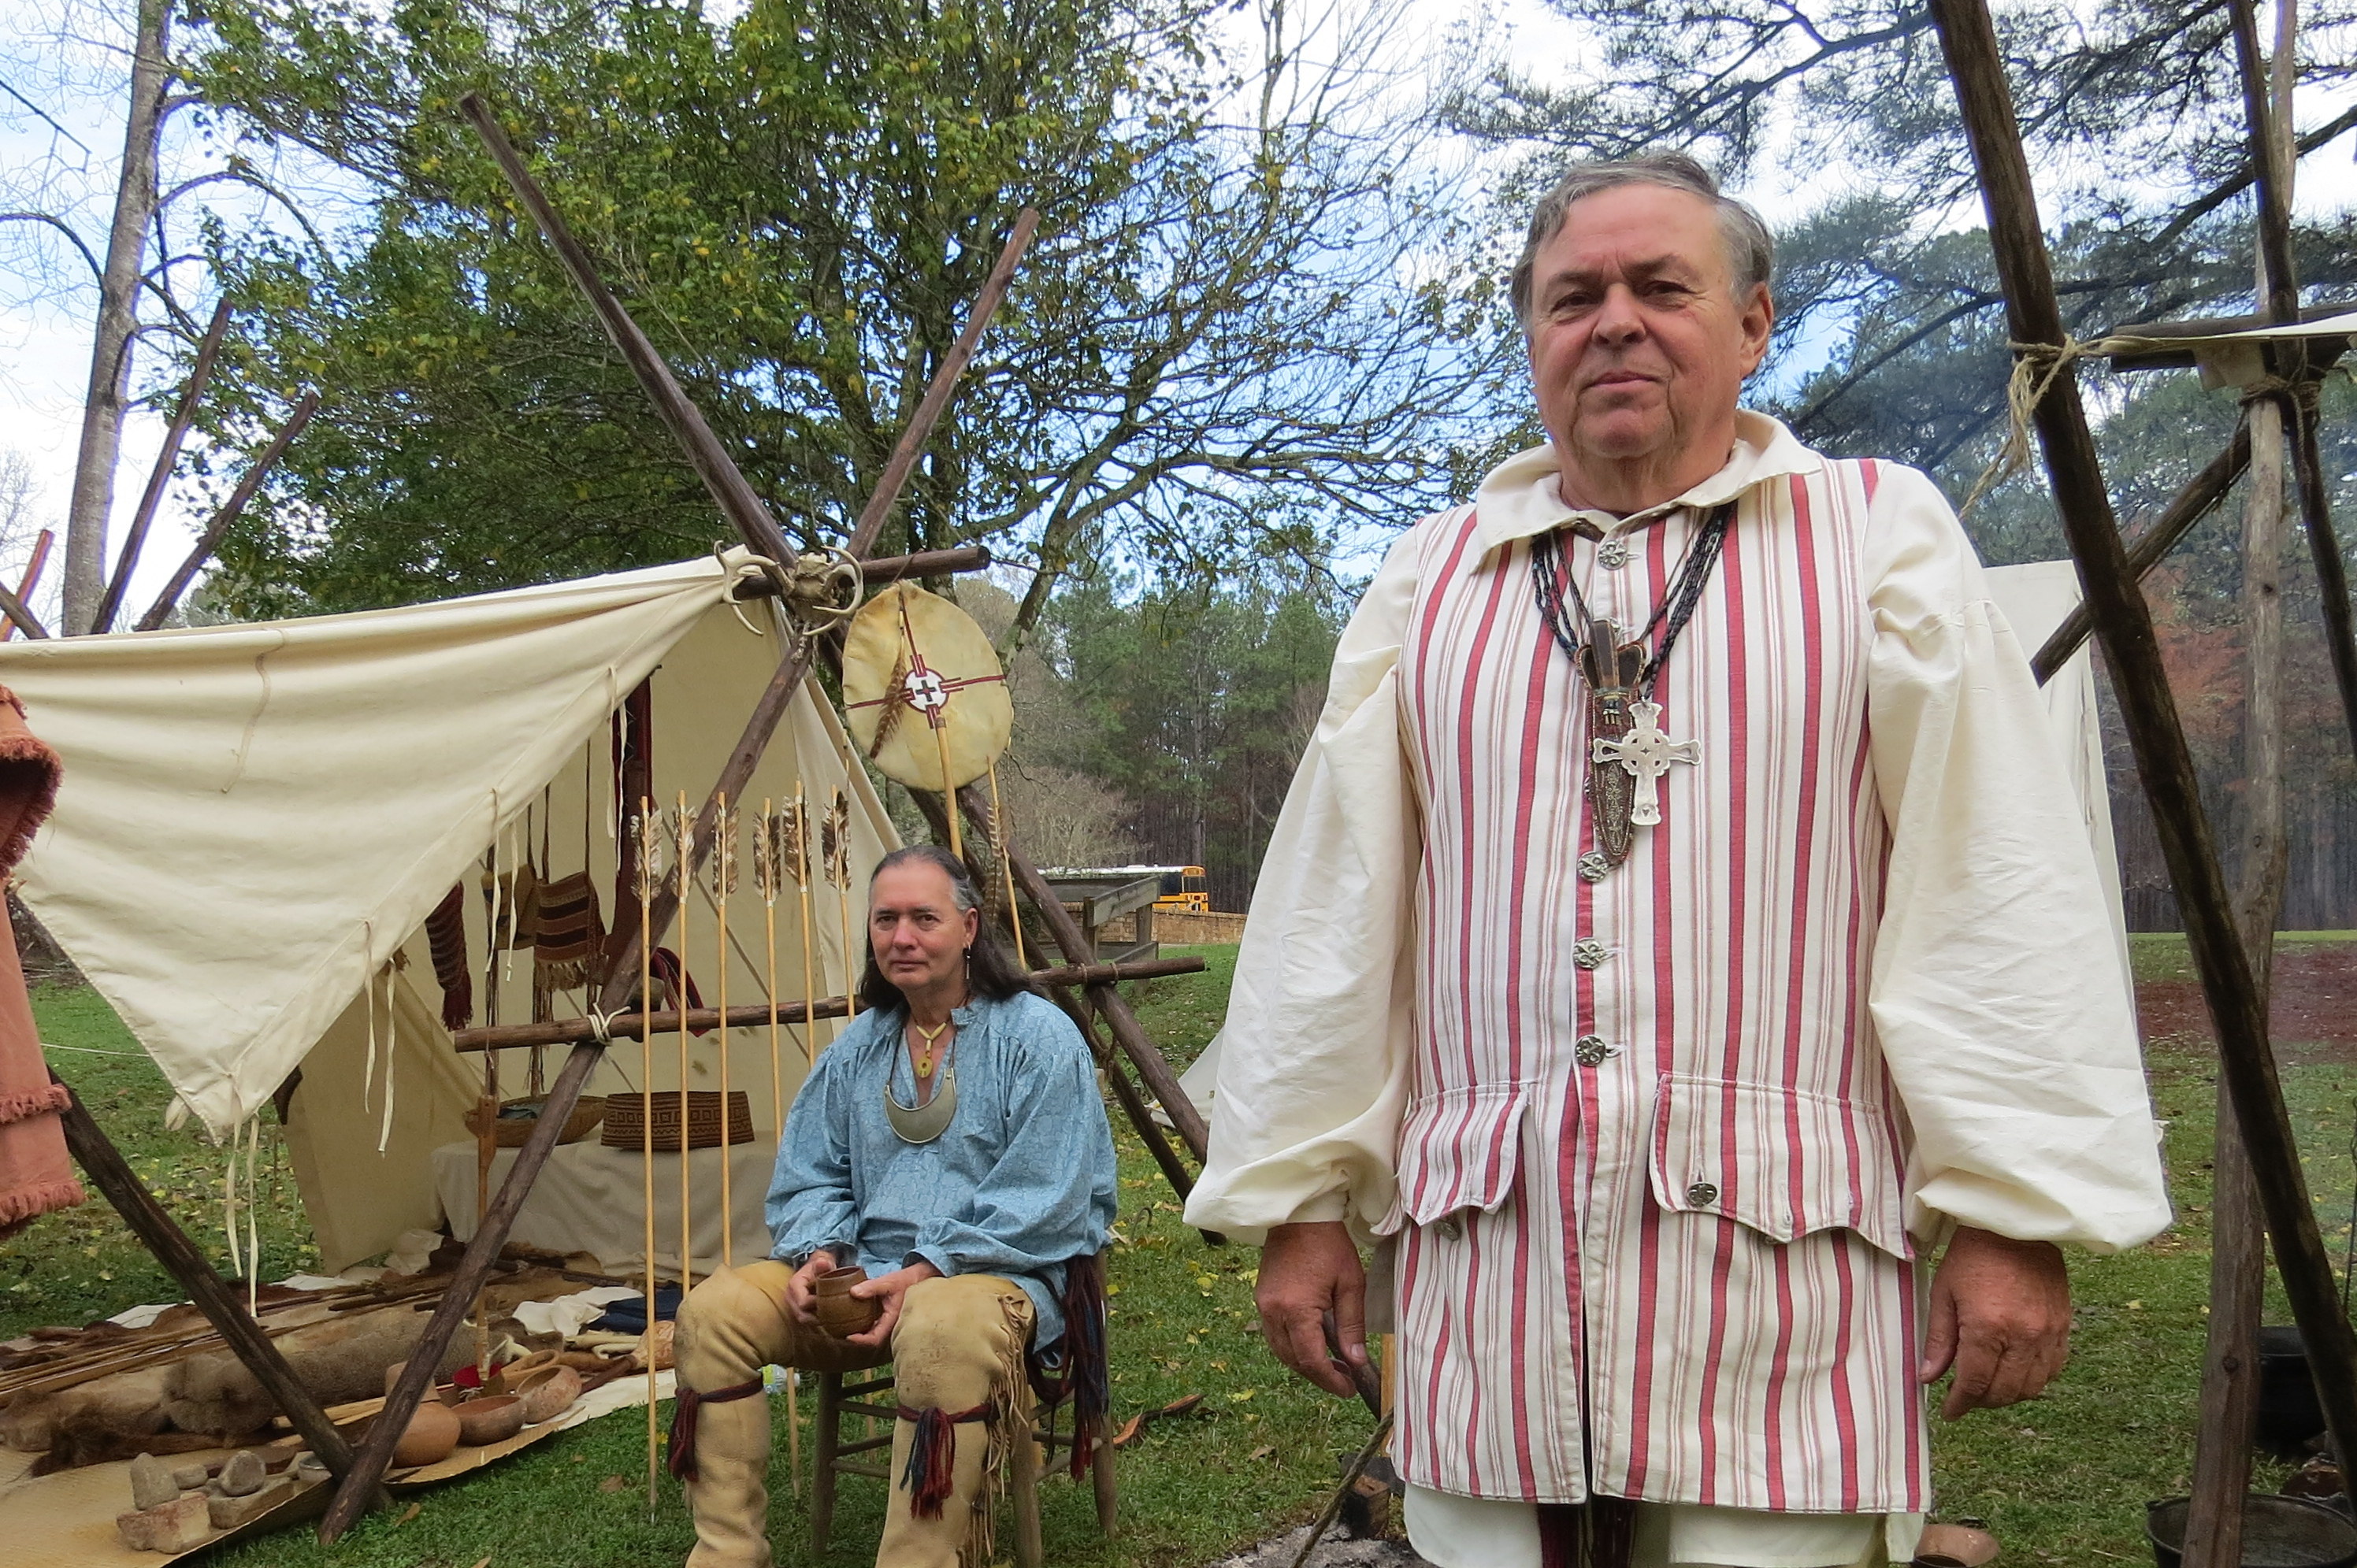 two men, one standing in foreground the other sitting in background, dressed as Creek Indians